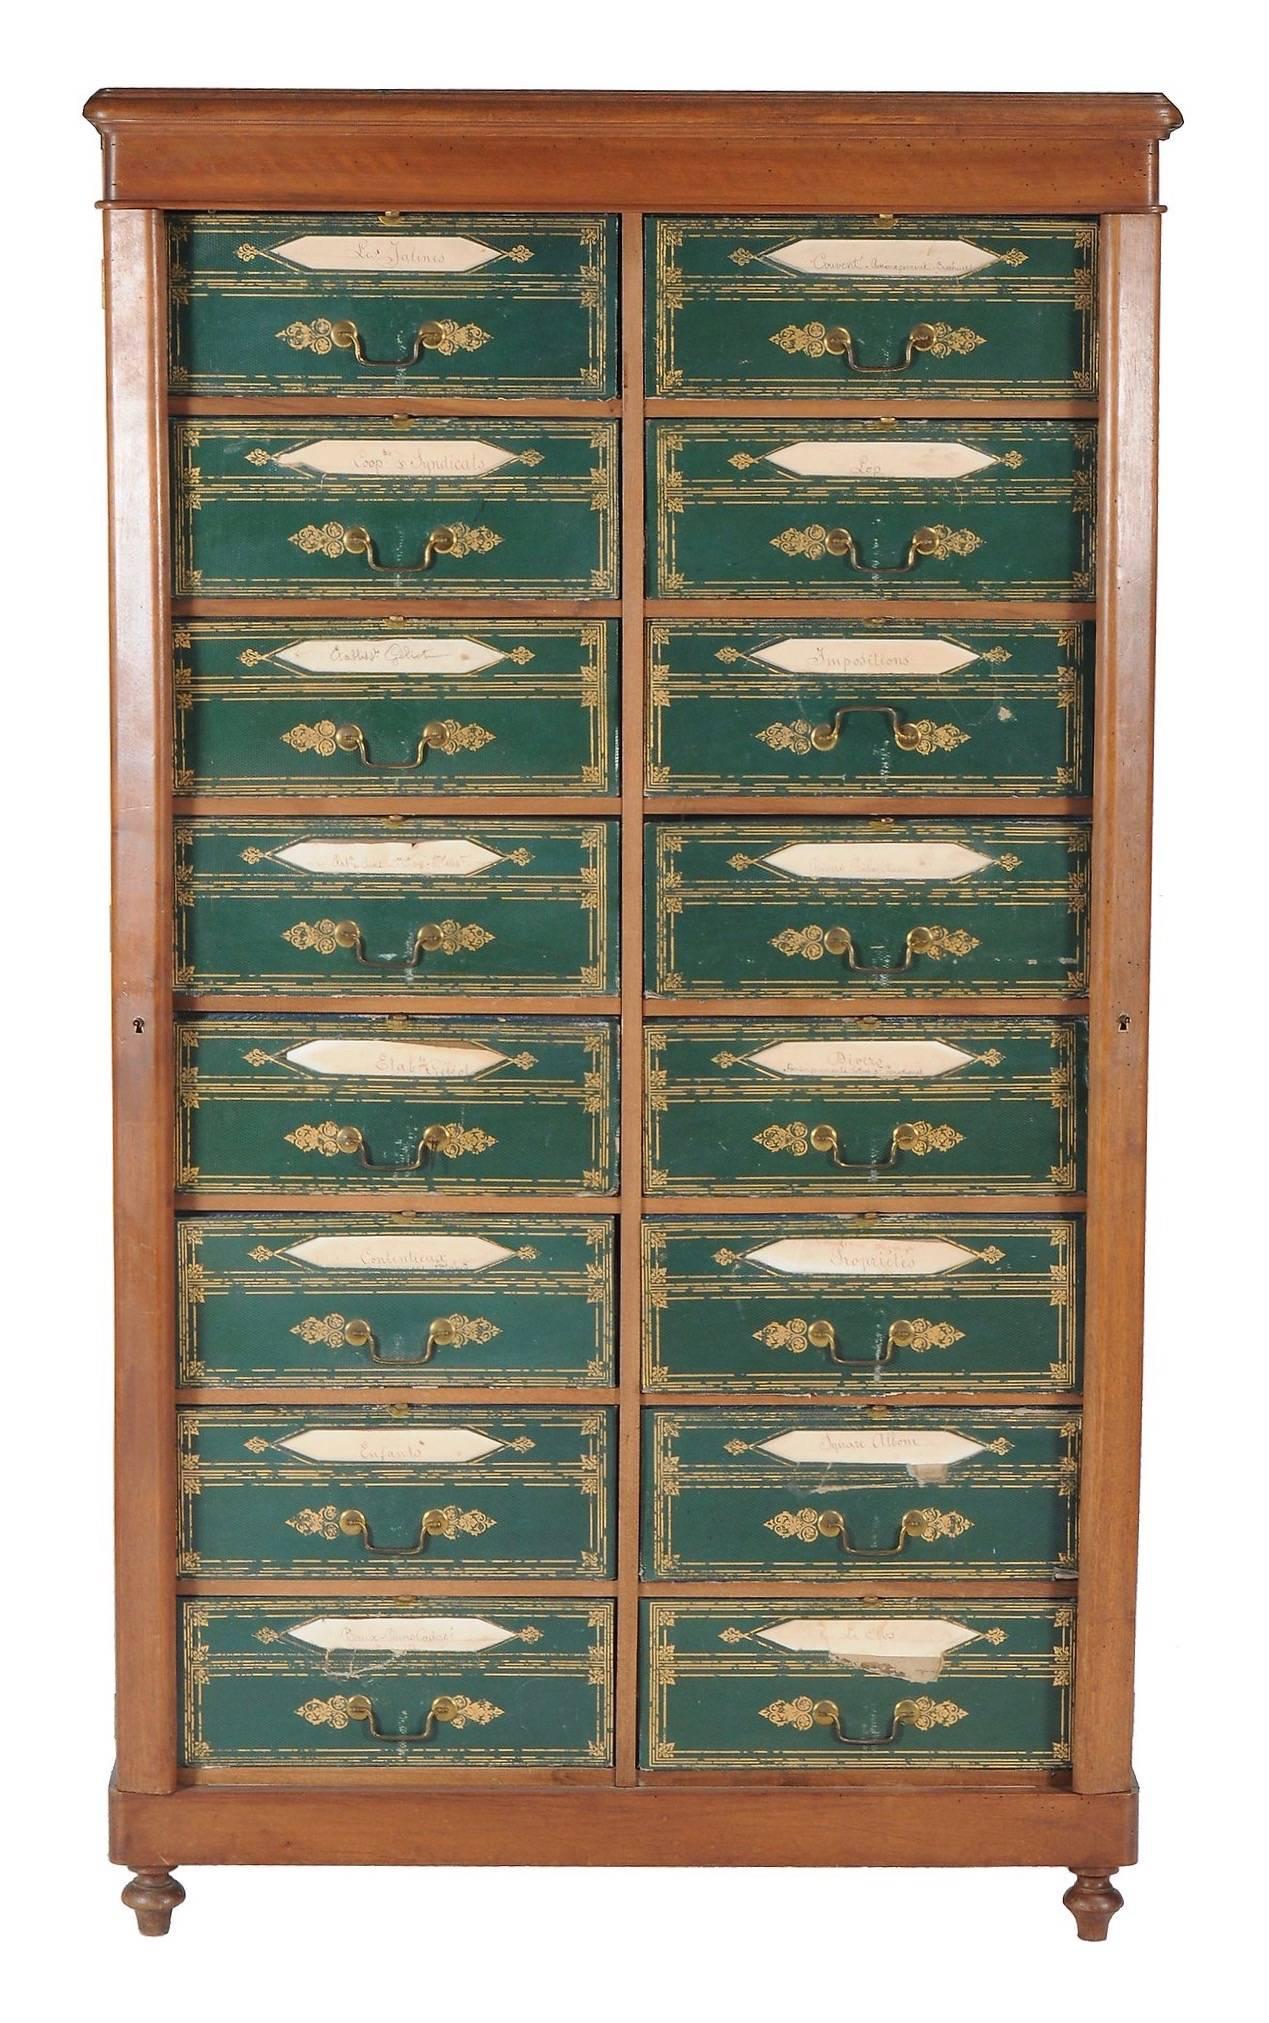 A magnificent Louis Phillipe mahogany and gilt tooled leatherette Cartonnier, circa 1840, of Wellington type, incorporating 16 paper lined drawers, fronted by gilt tooled leatherette fronts incorporating title apertures, on a plinth base and turned